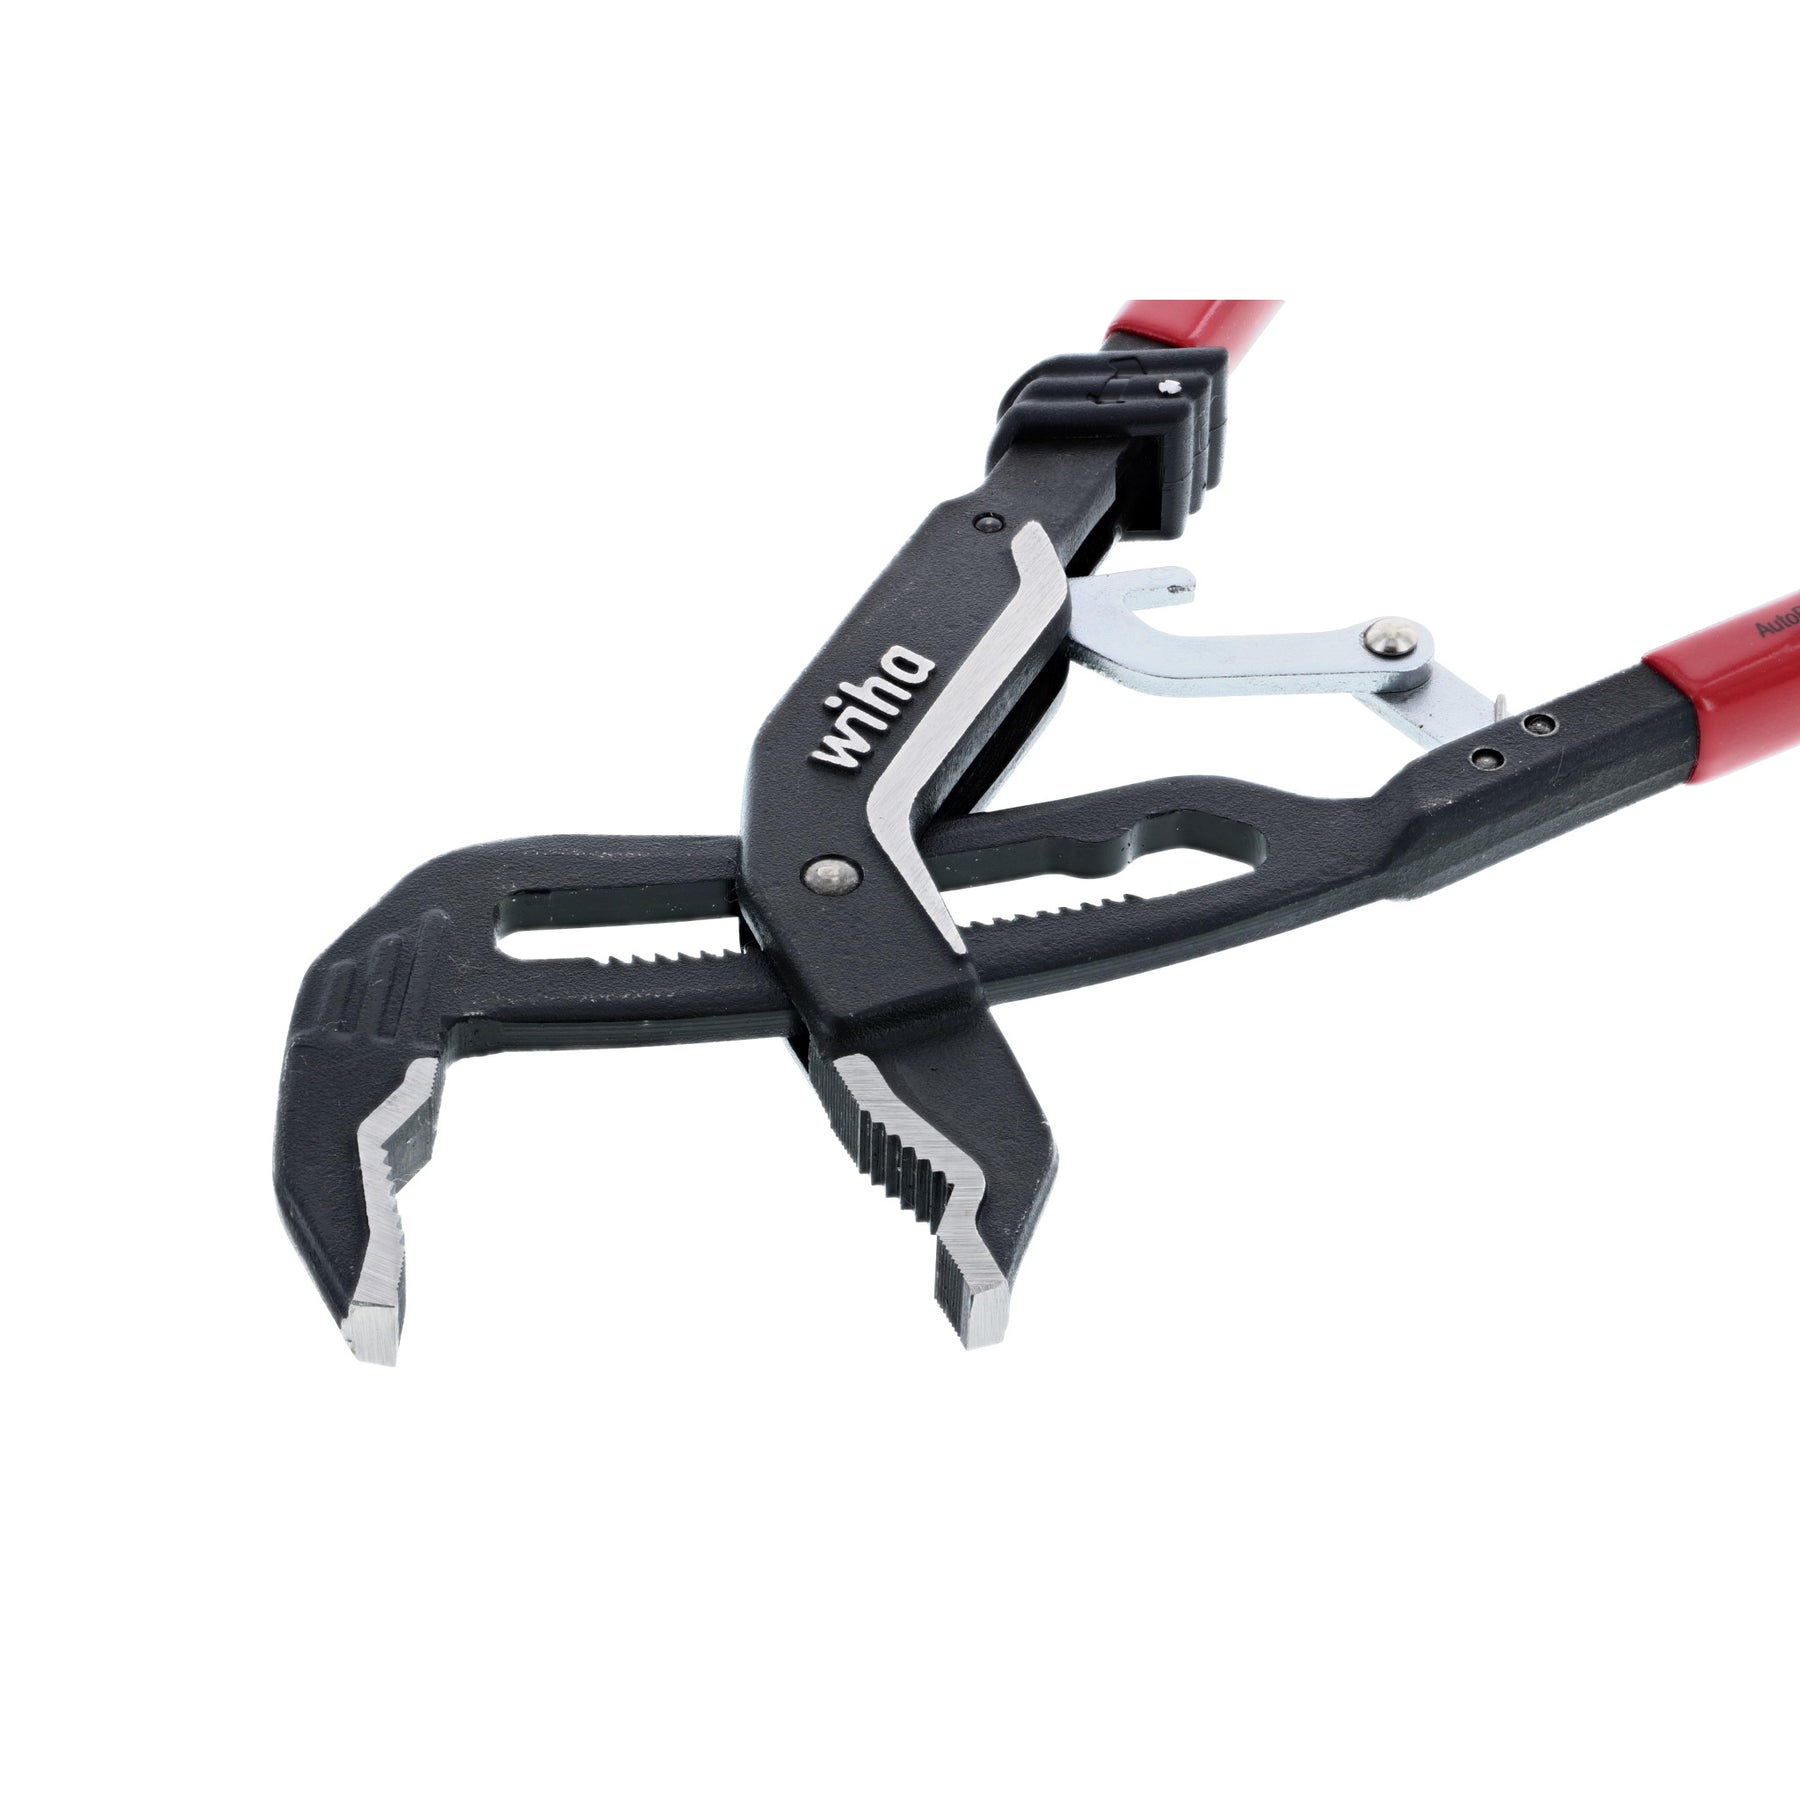 Classic Auto Grip V-Jaw Tongue and Groove Pliers 10"